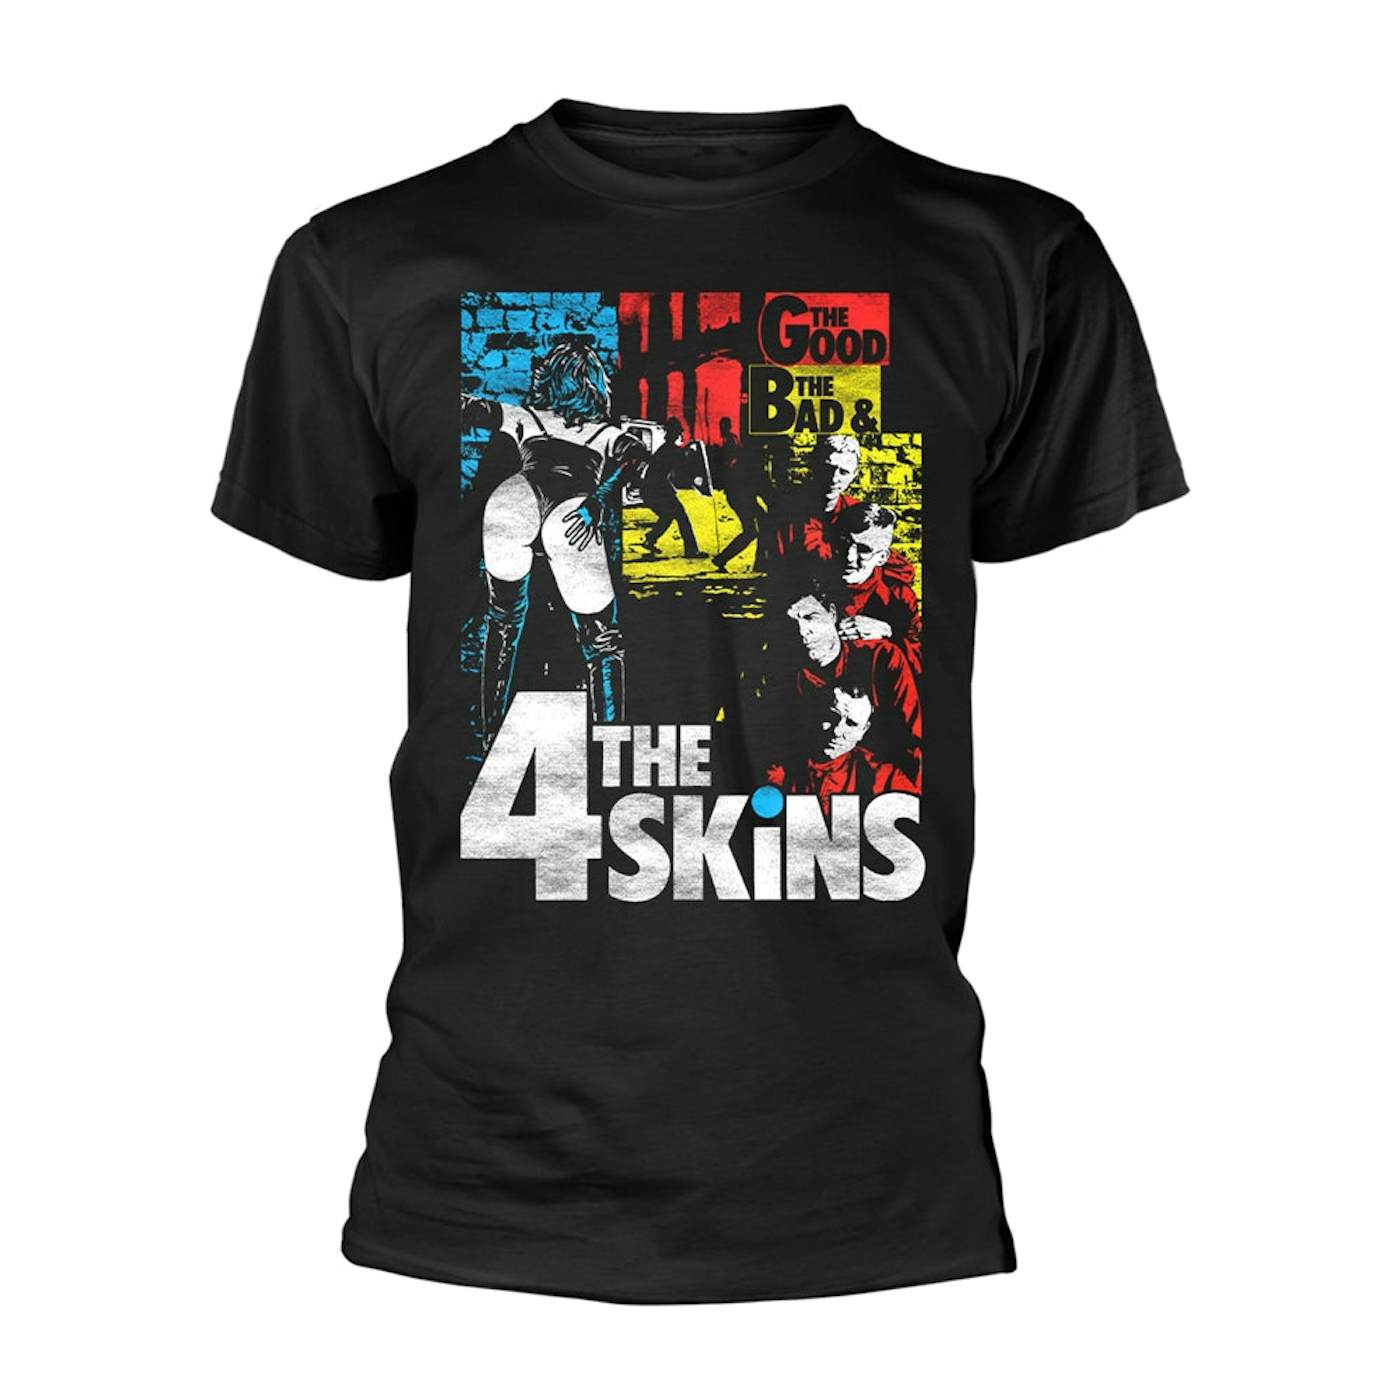 4 Skins T Shirt - The Good The Bad & The 4 Skins